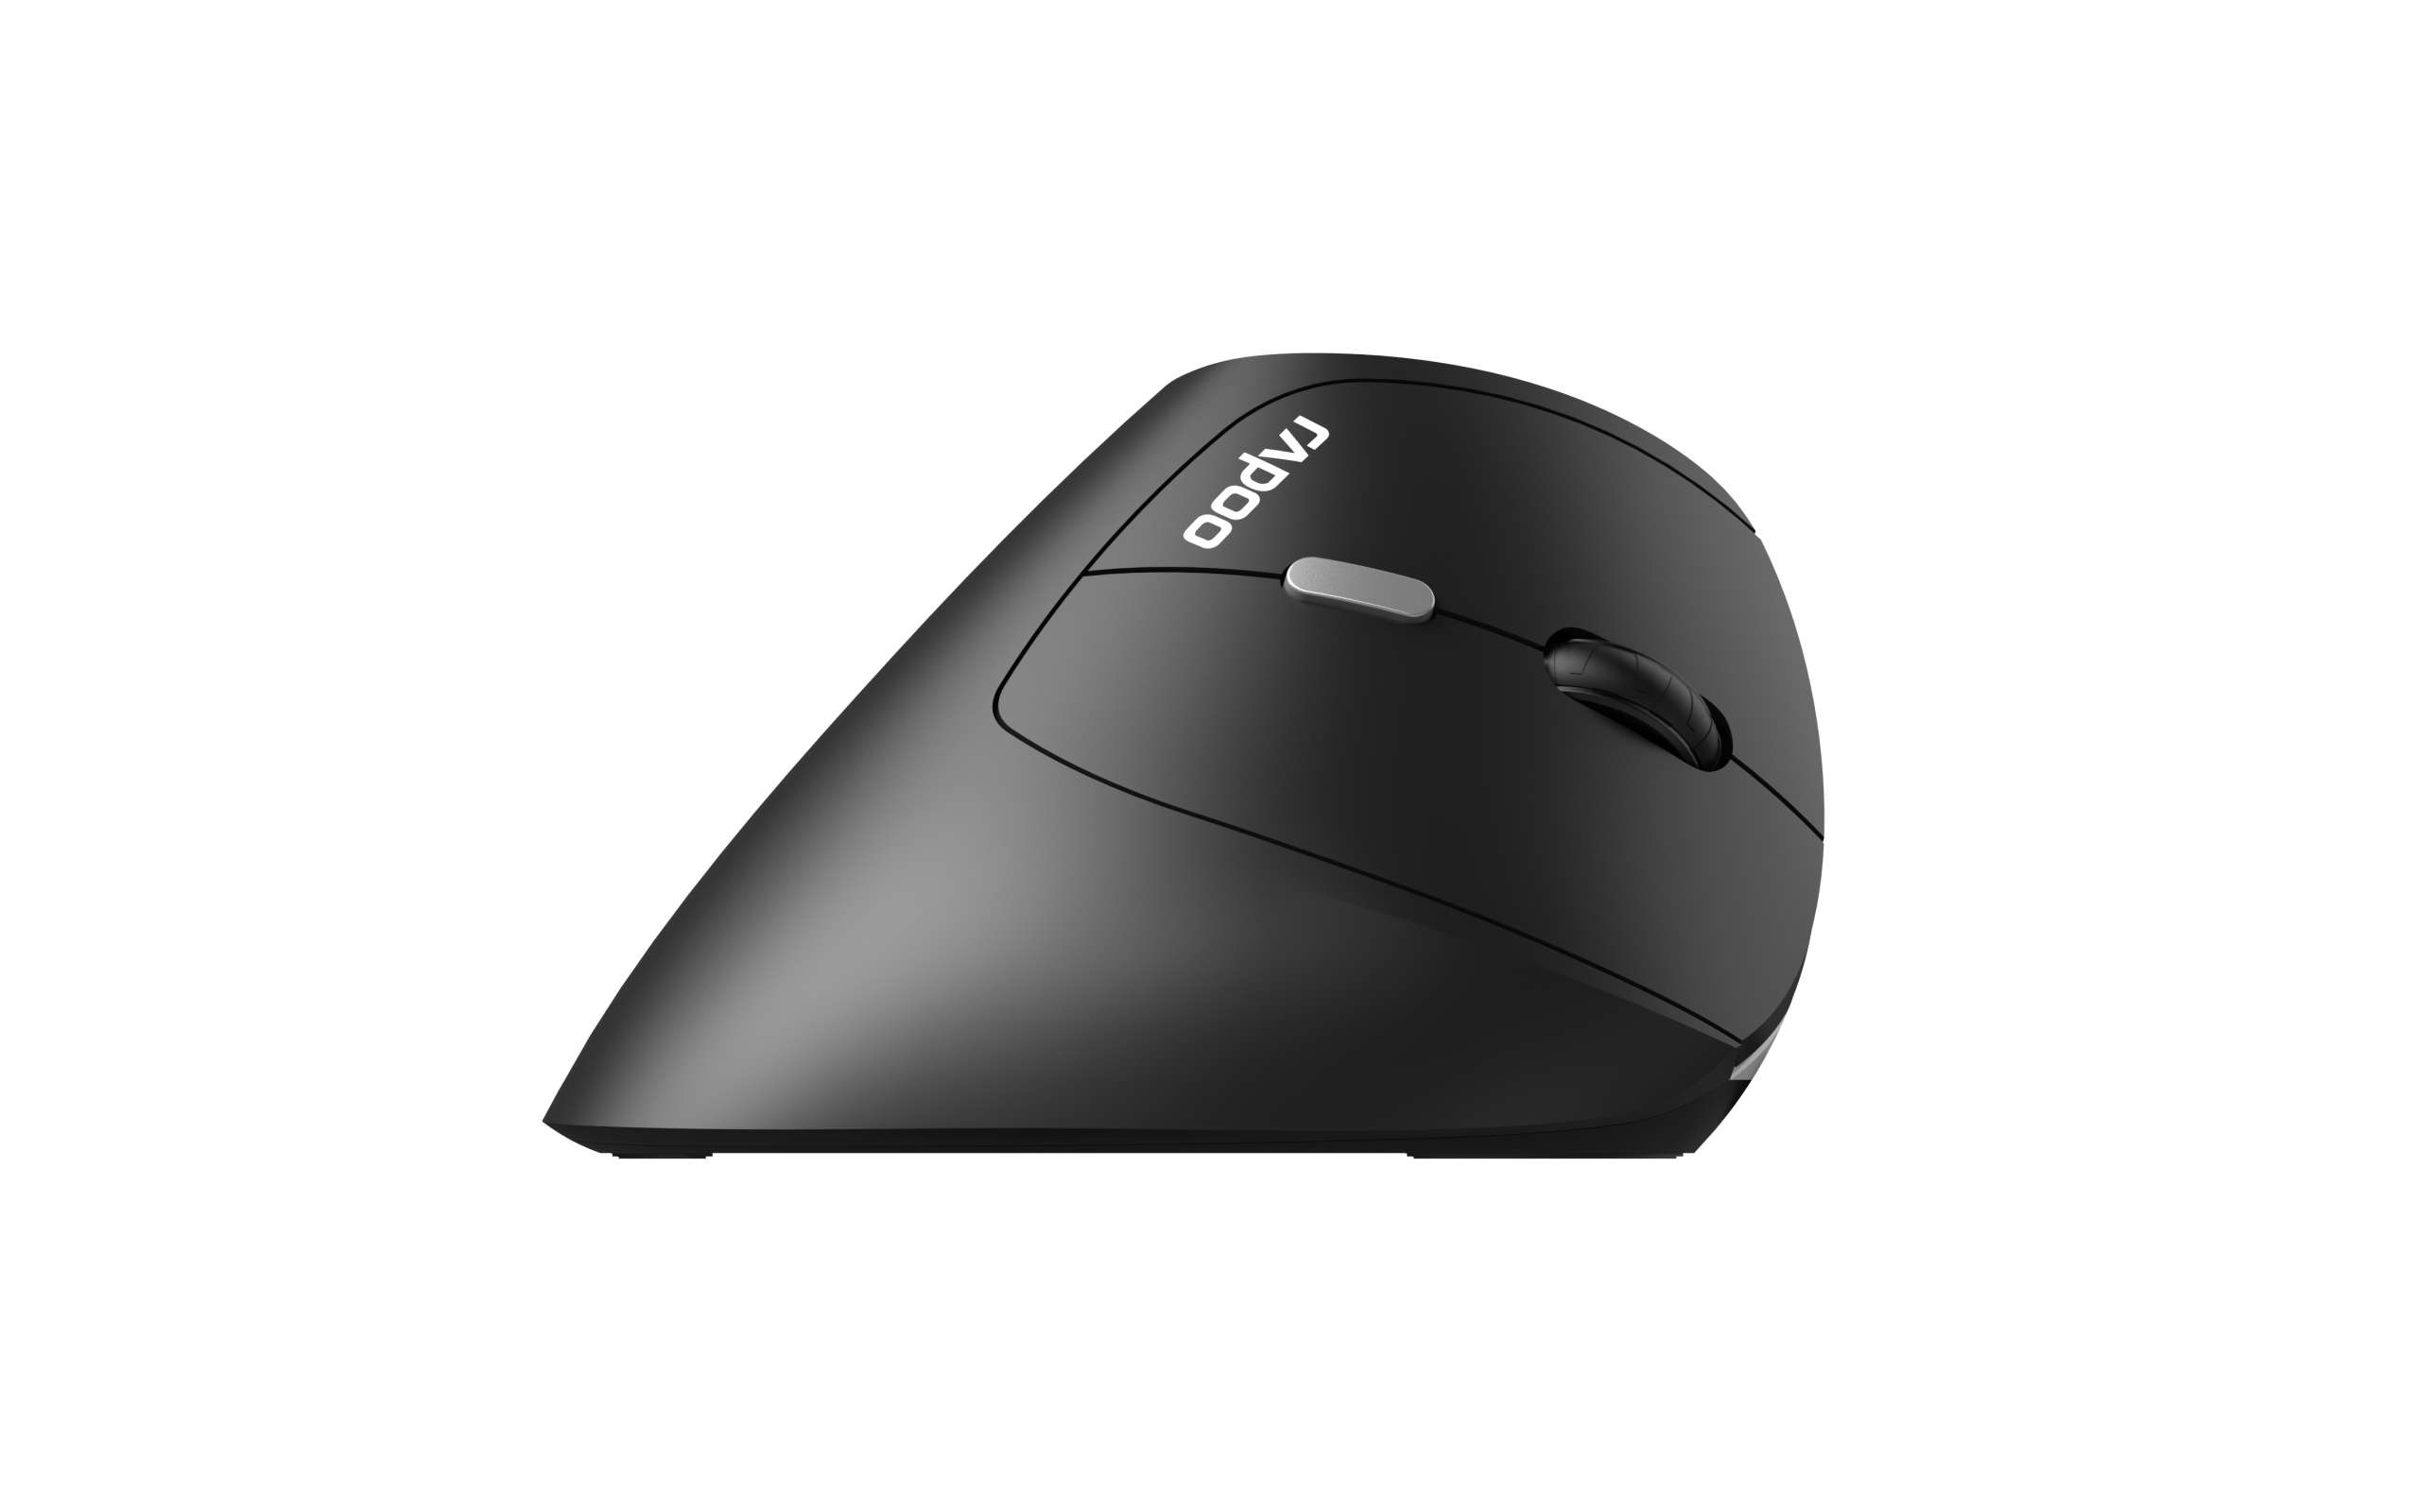 RAPOO EV250 Ergonomic Vertical Wireless Mouse 6 Buttons 800/1200/1600 DPI Optical Silent Click Mice - Black (Renamed from MV20)